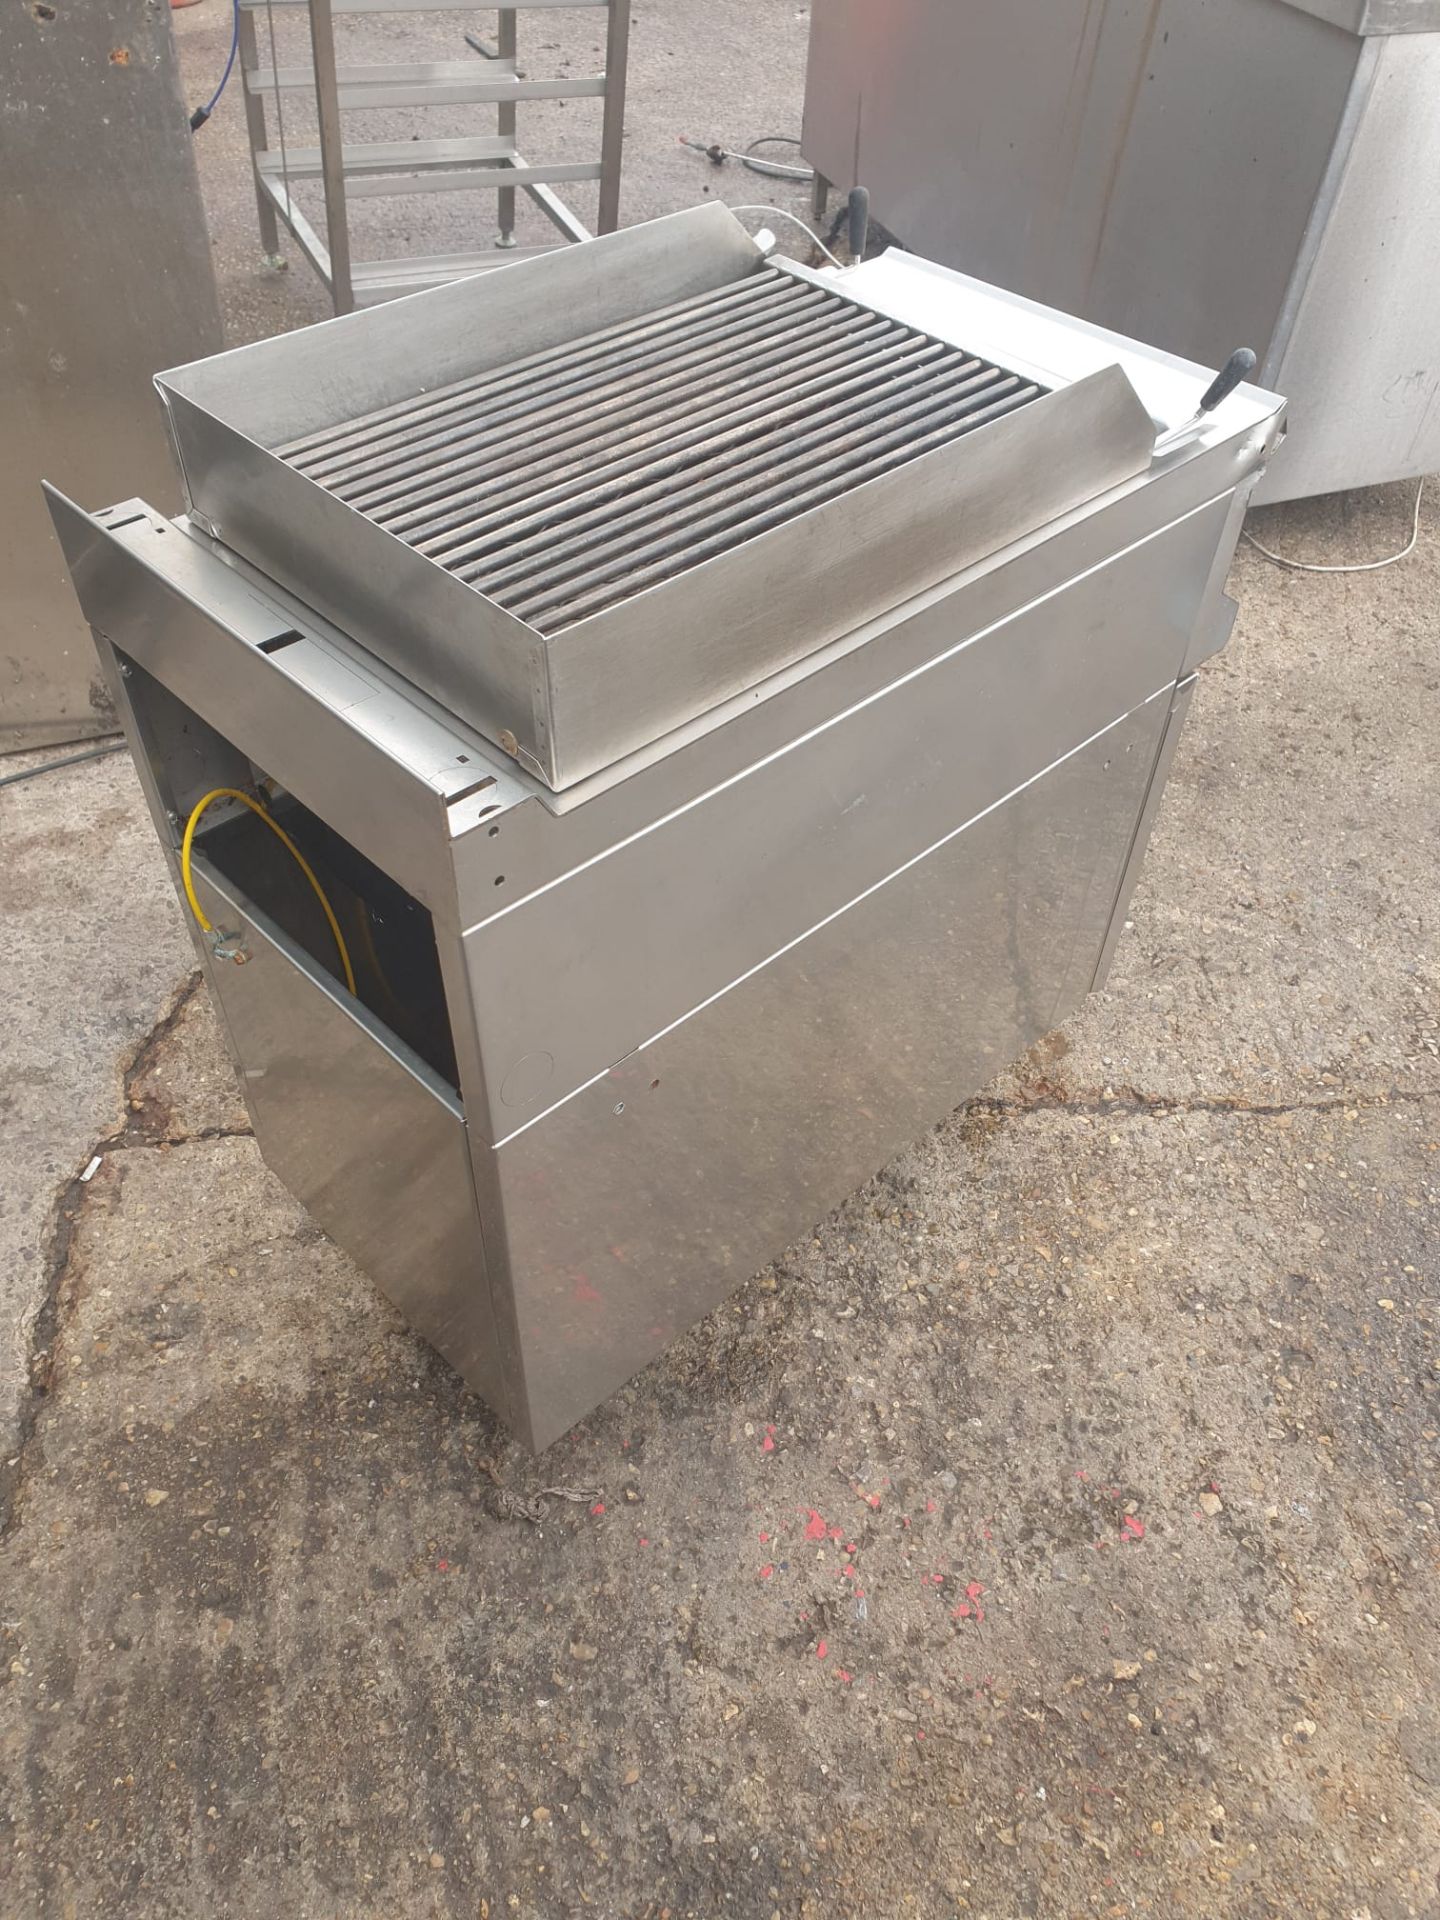 CHARGRILL 450 MM WIDE - FULLY WORKING - NATURAL GAS - Image 4 of 4